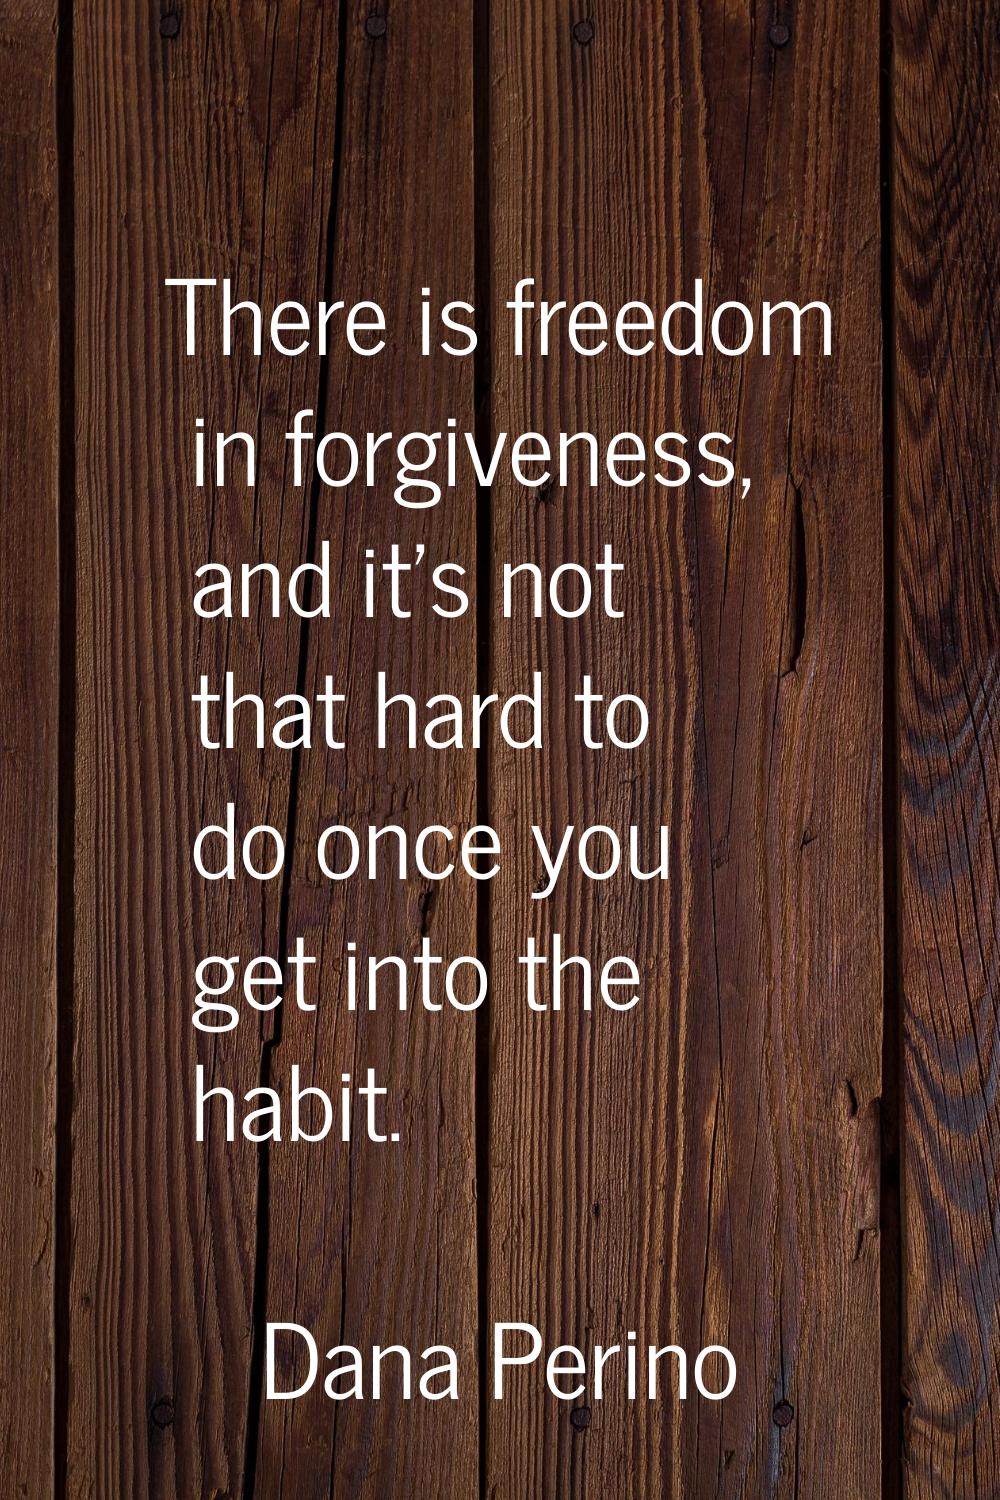 There is freedom in forgiveness, and it's not that hard to do once you get into the habit.